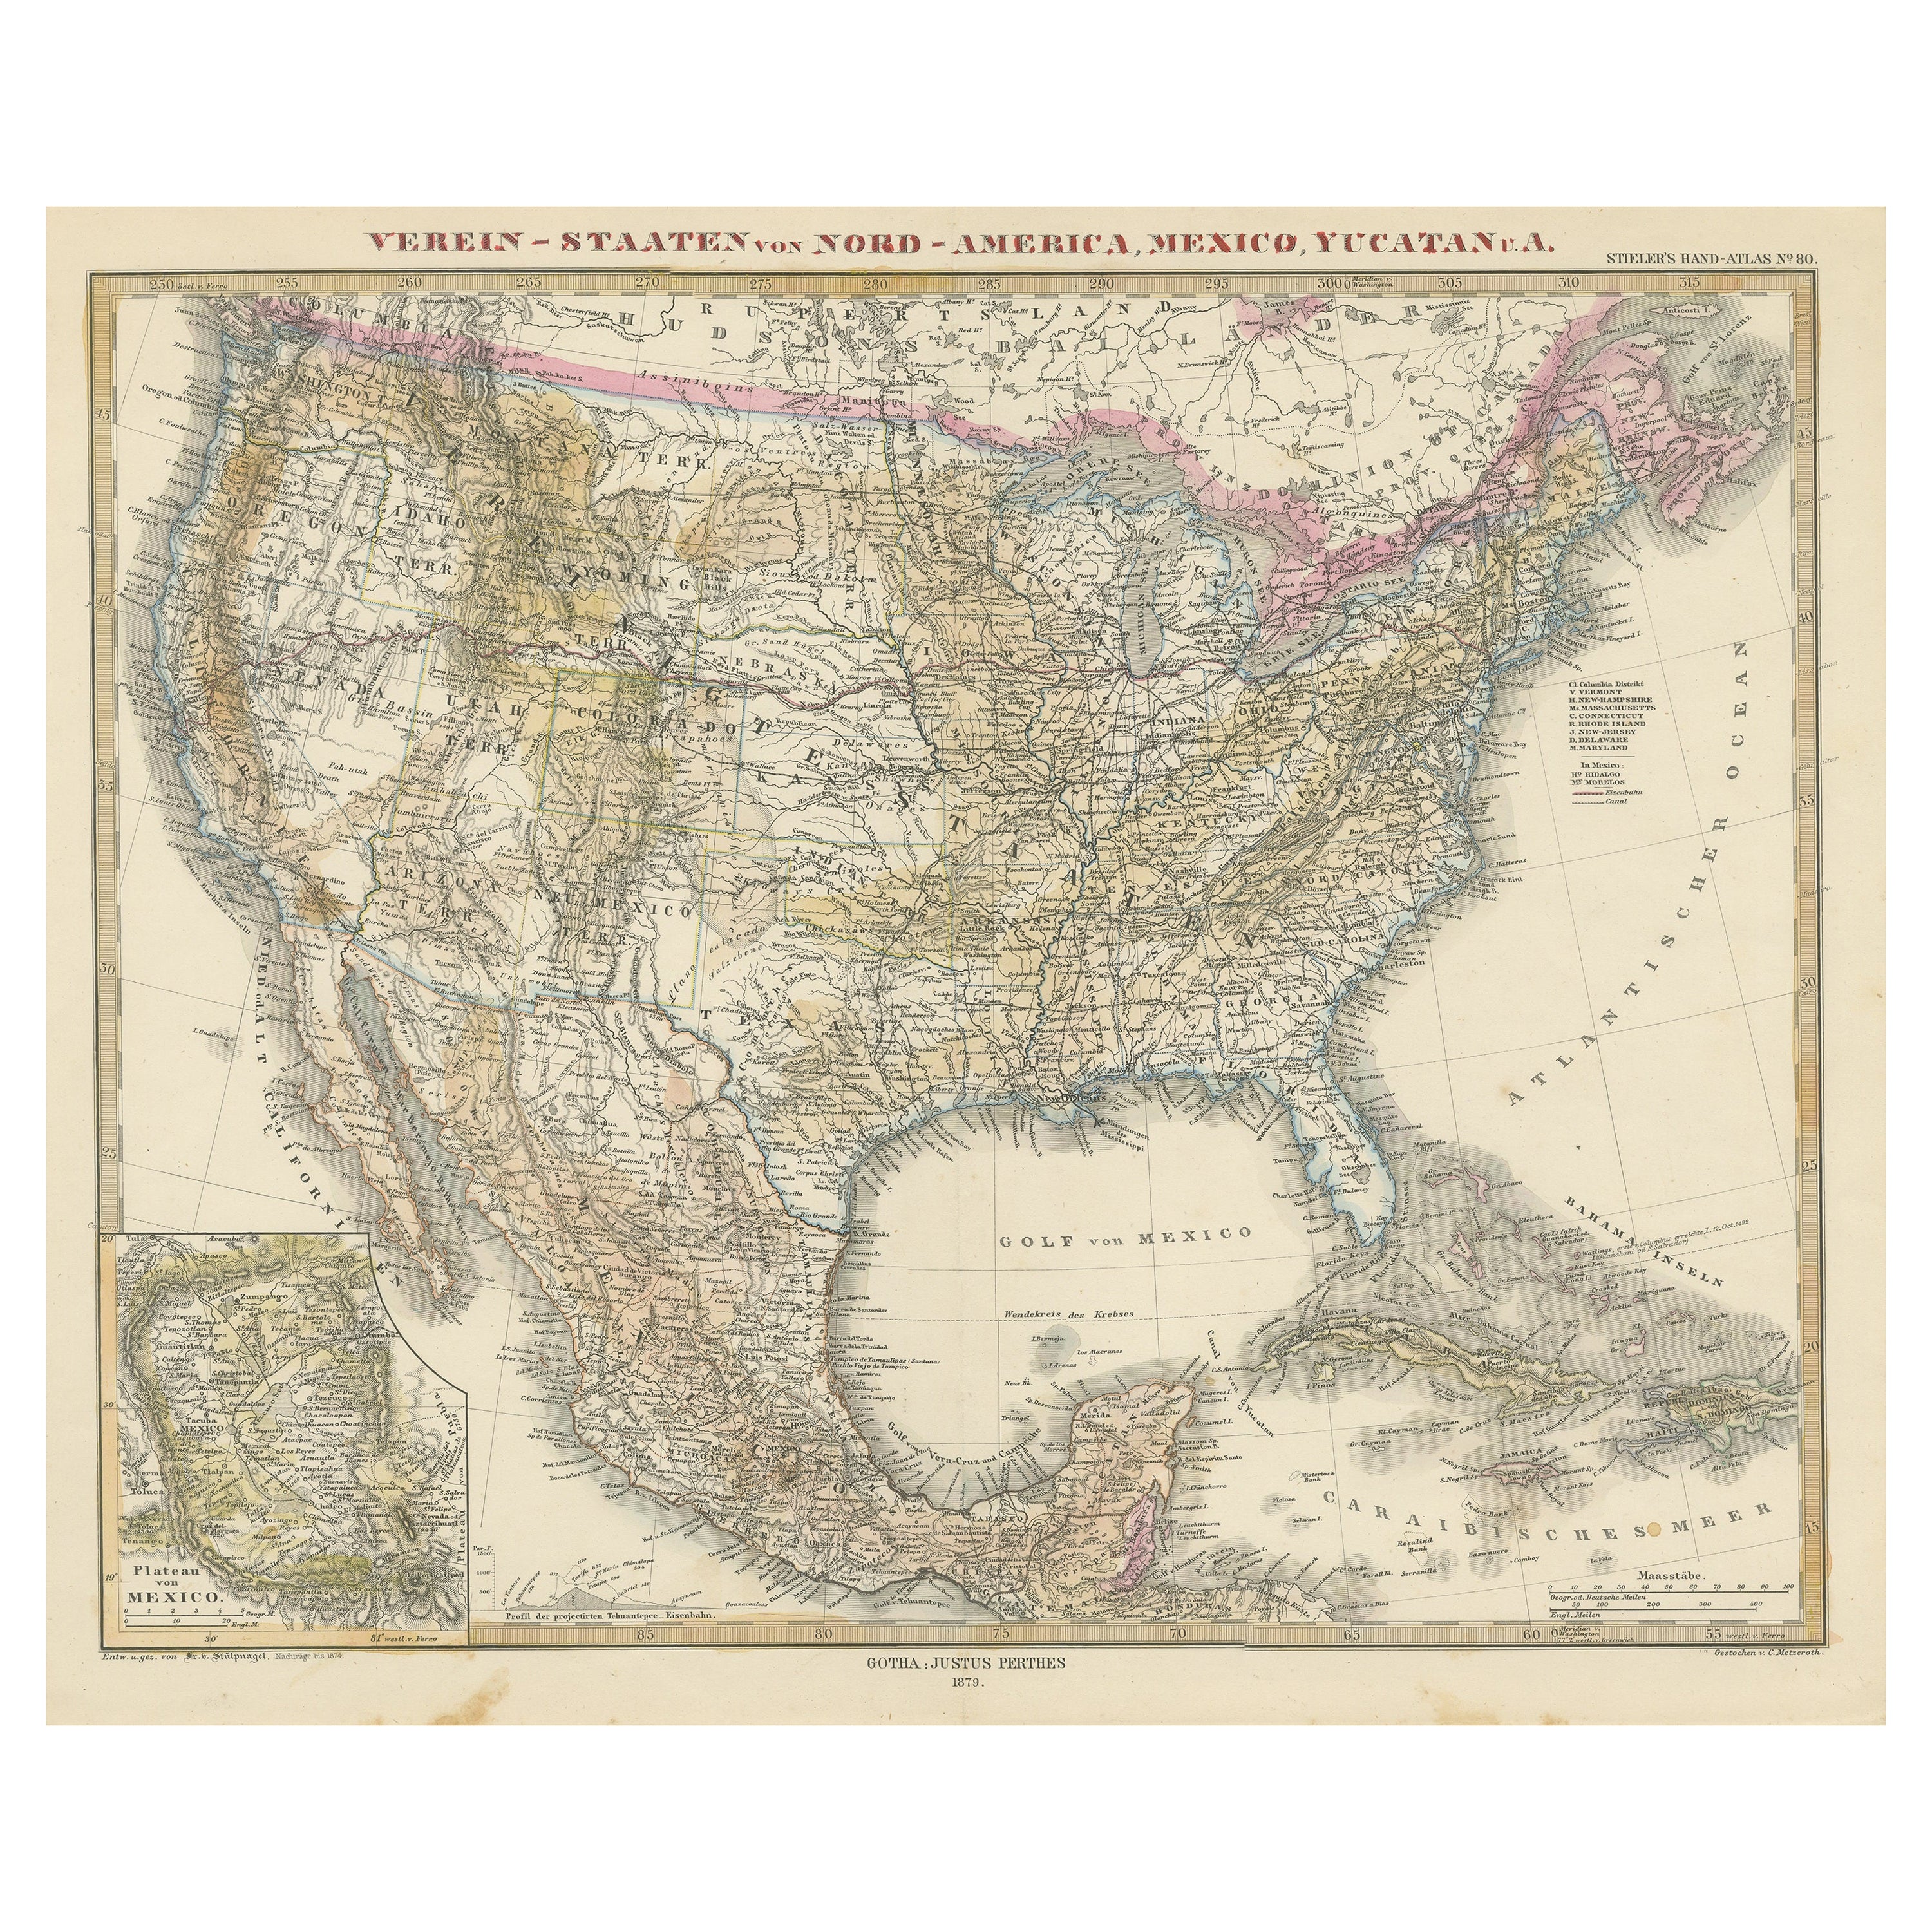 Antique Map with Hand Coloring of the United States and the Caribbean